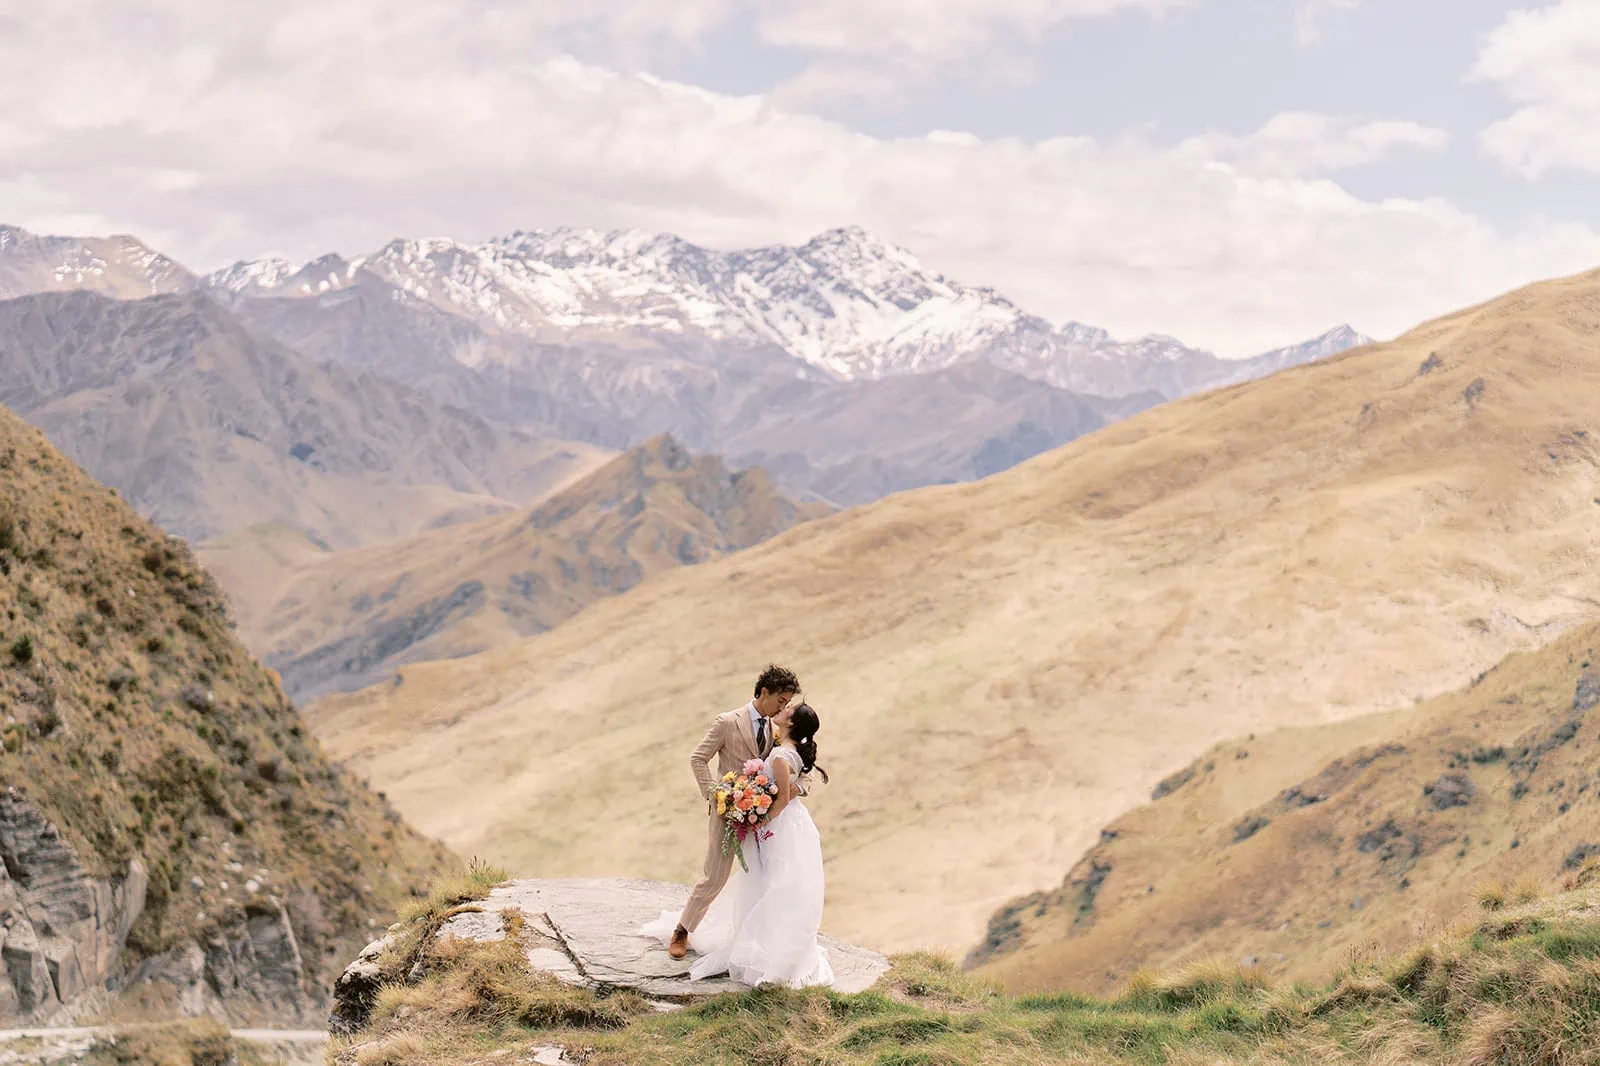 Queenstown Elopement Heli Wedding Photographer クイーンズタウン結婚式 | Taisei and Saki having a Queenstown Heli Pre-Wedding Photoshoot on a rock in the mountains.